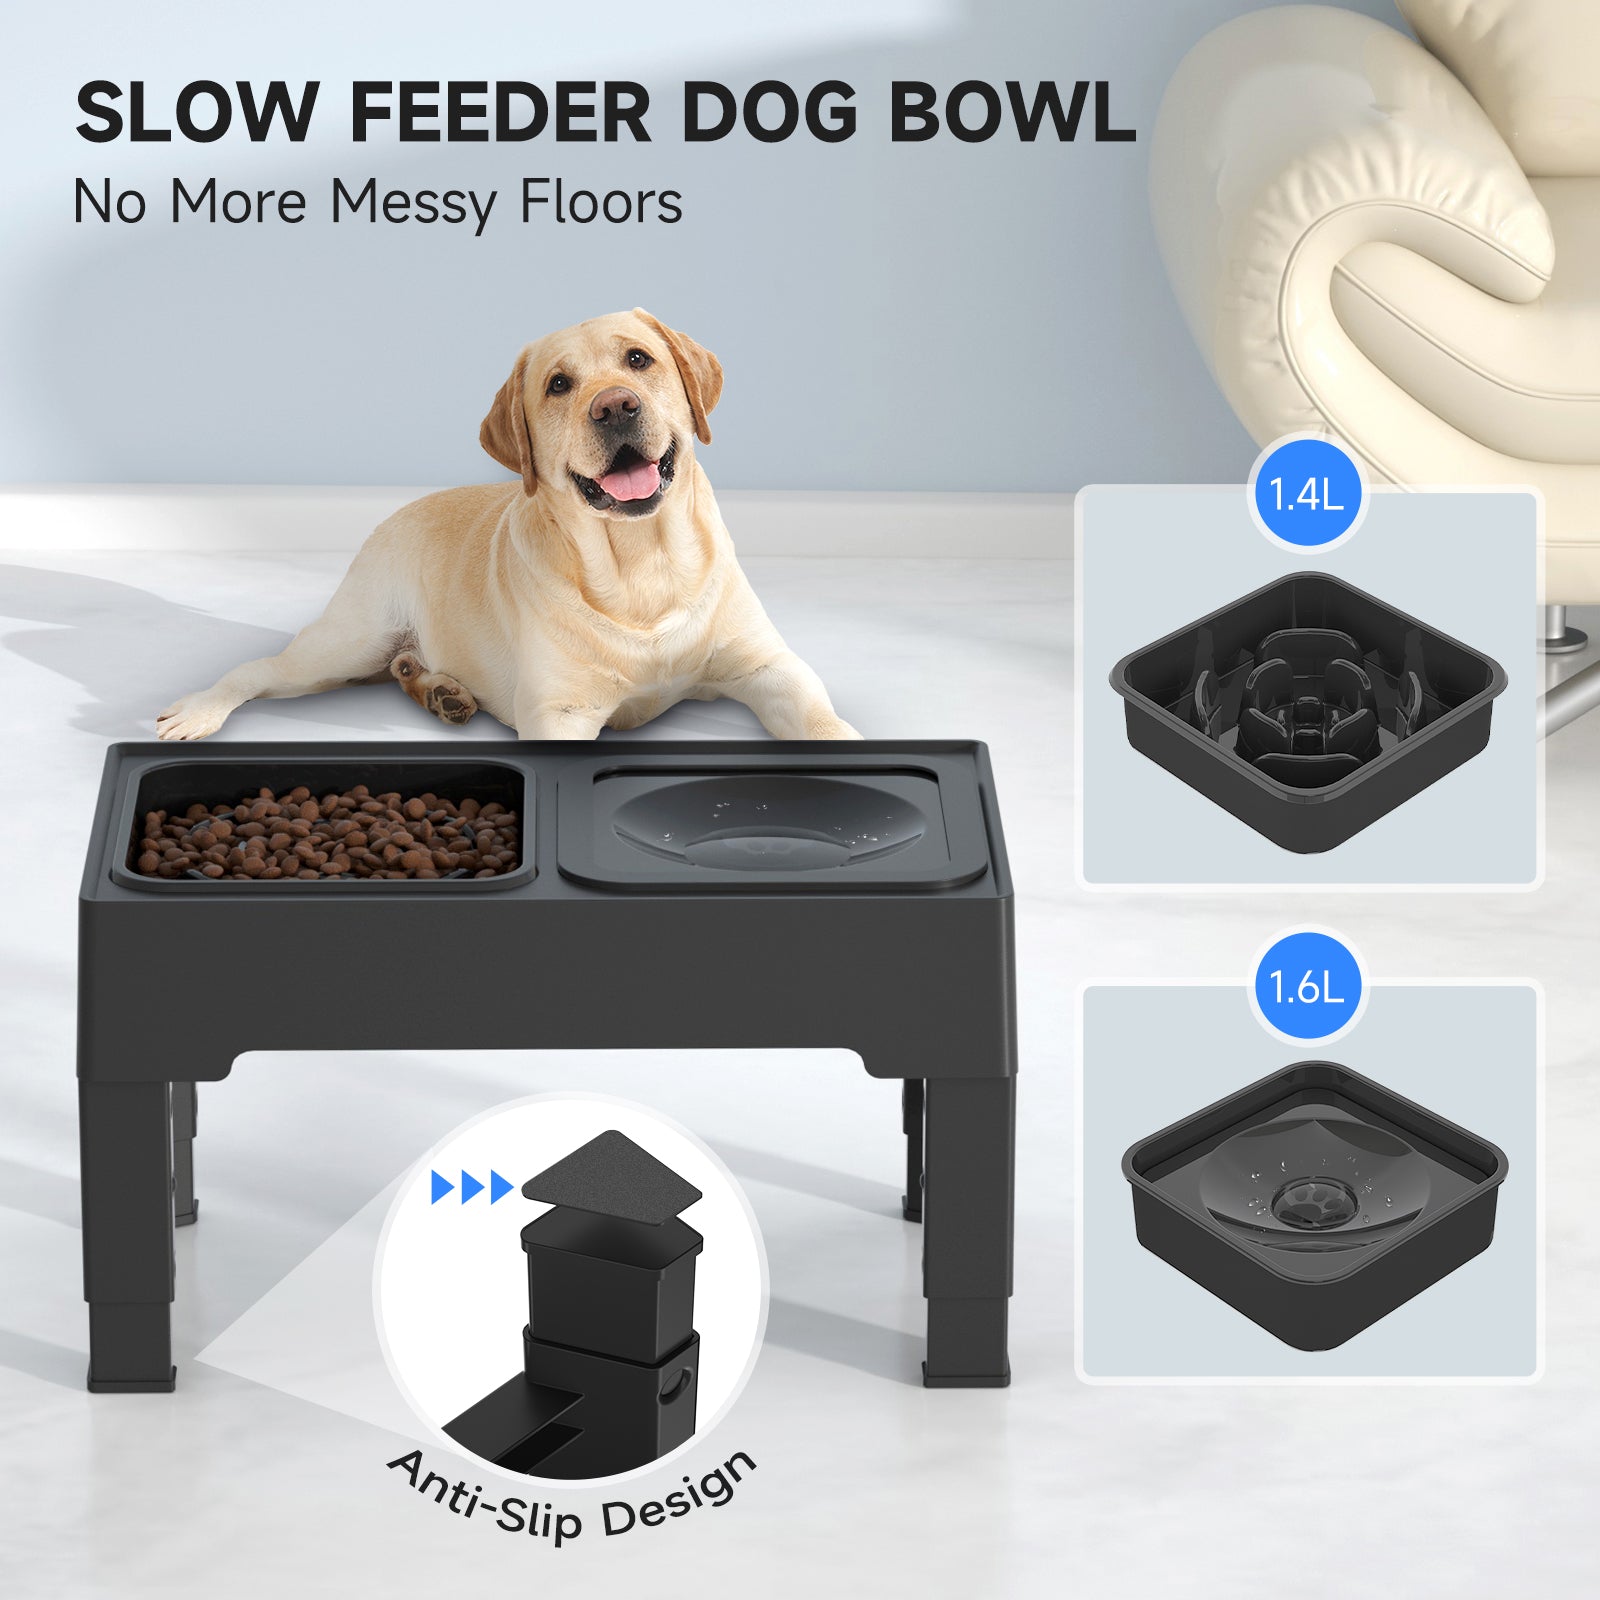 ELS PET Elevated Dog Bowls Adjustable Raised Dog Bowl with Slow Feeder Dog  Bowl and Dog Water Bowl Non-Spill for Dogs and Pets - AliExpress